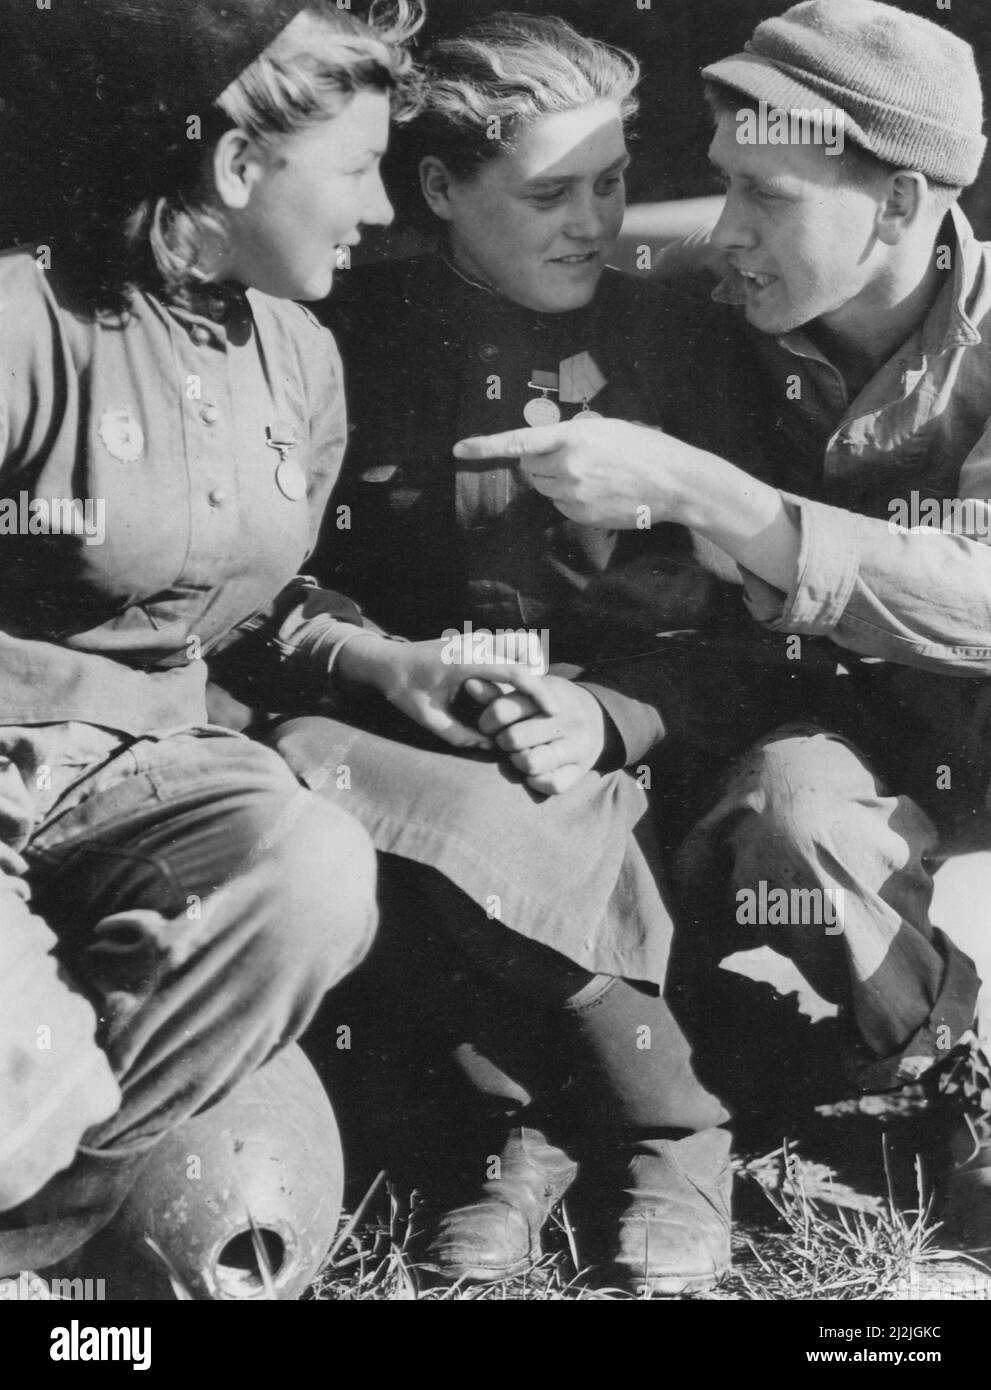 At one of the new U.S. air bases in Russia, Sgt. G.S. McCall, 926 Telegair St., Augusta, Ga., examines the medals of two Russian women soldiers, both 21 years old. Both women are veterans of the Battles of Leningrad and Stalingrad Stock Photo